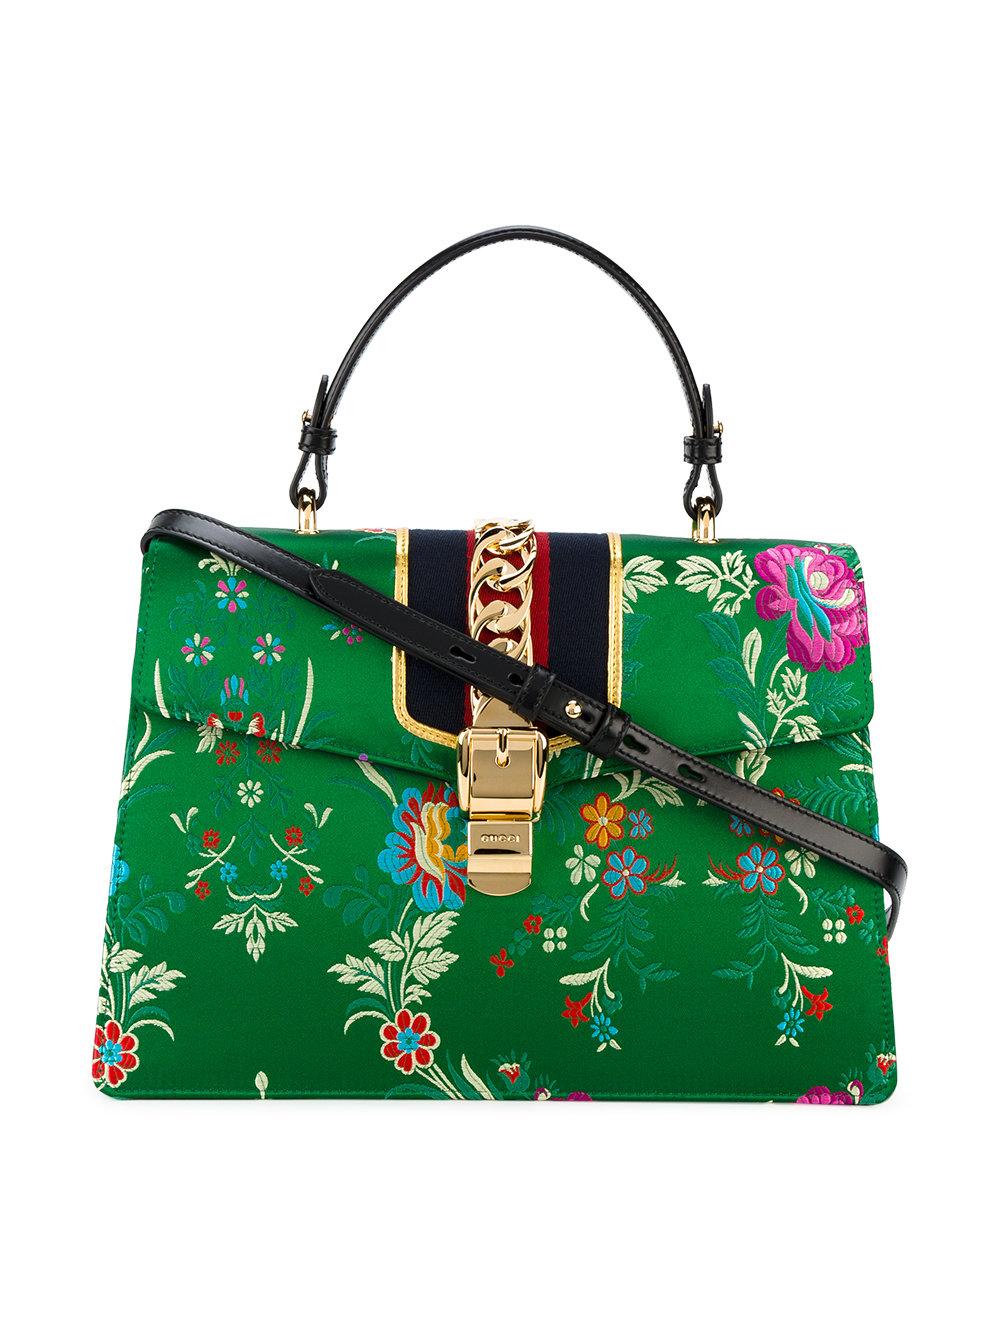 Lyst - Gucci Medium Sylvie Floral Print Bag With Top Handle in Green